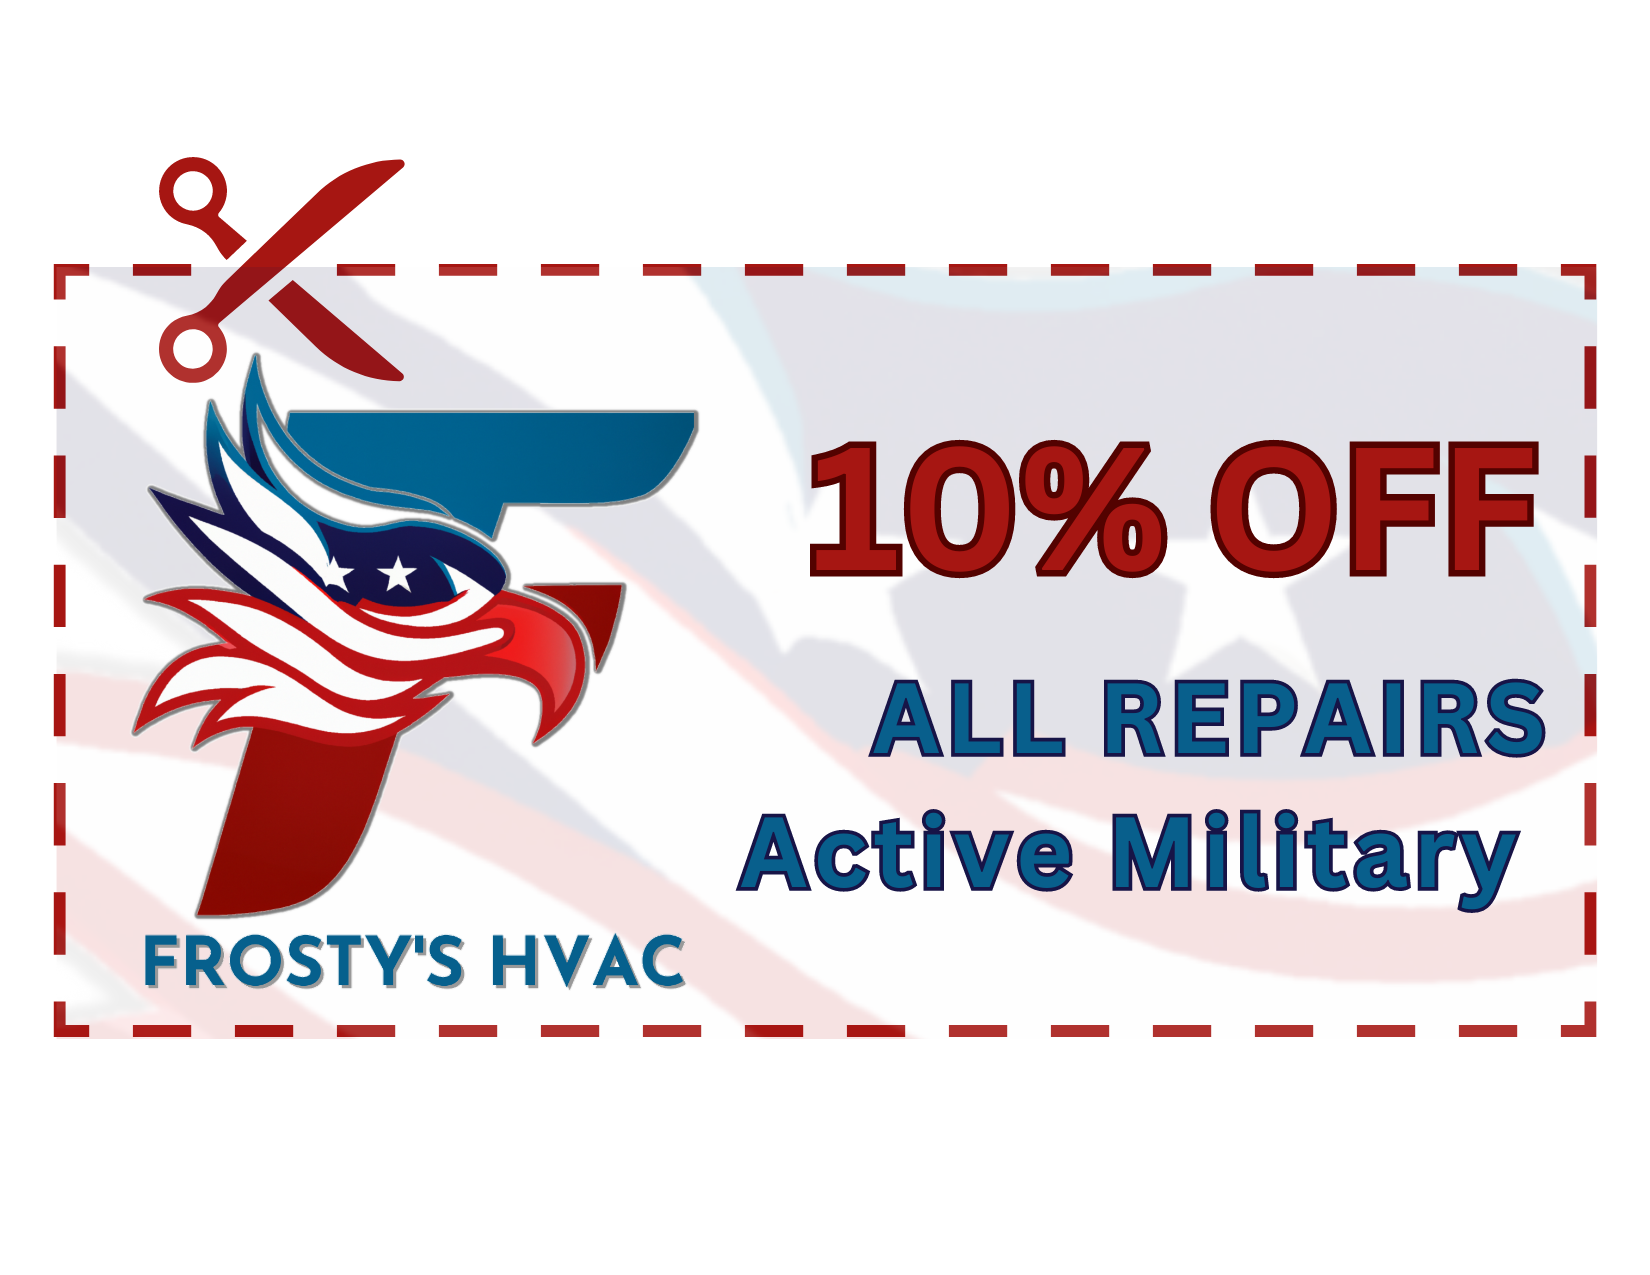 Air conditioning Military discount